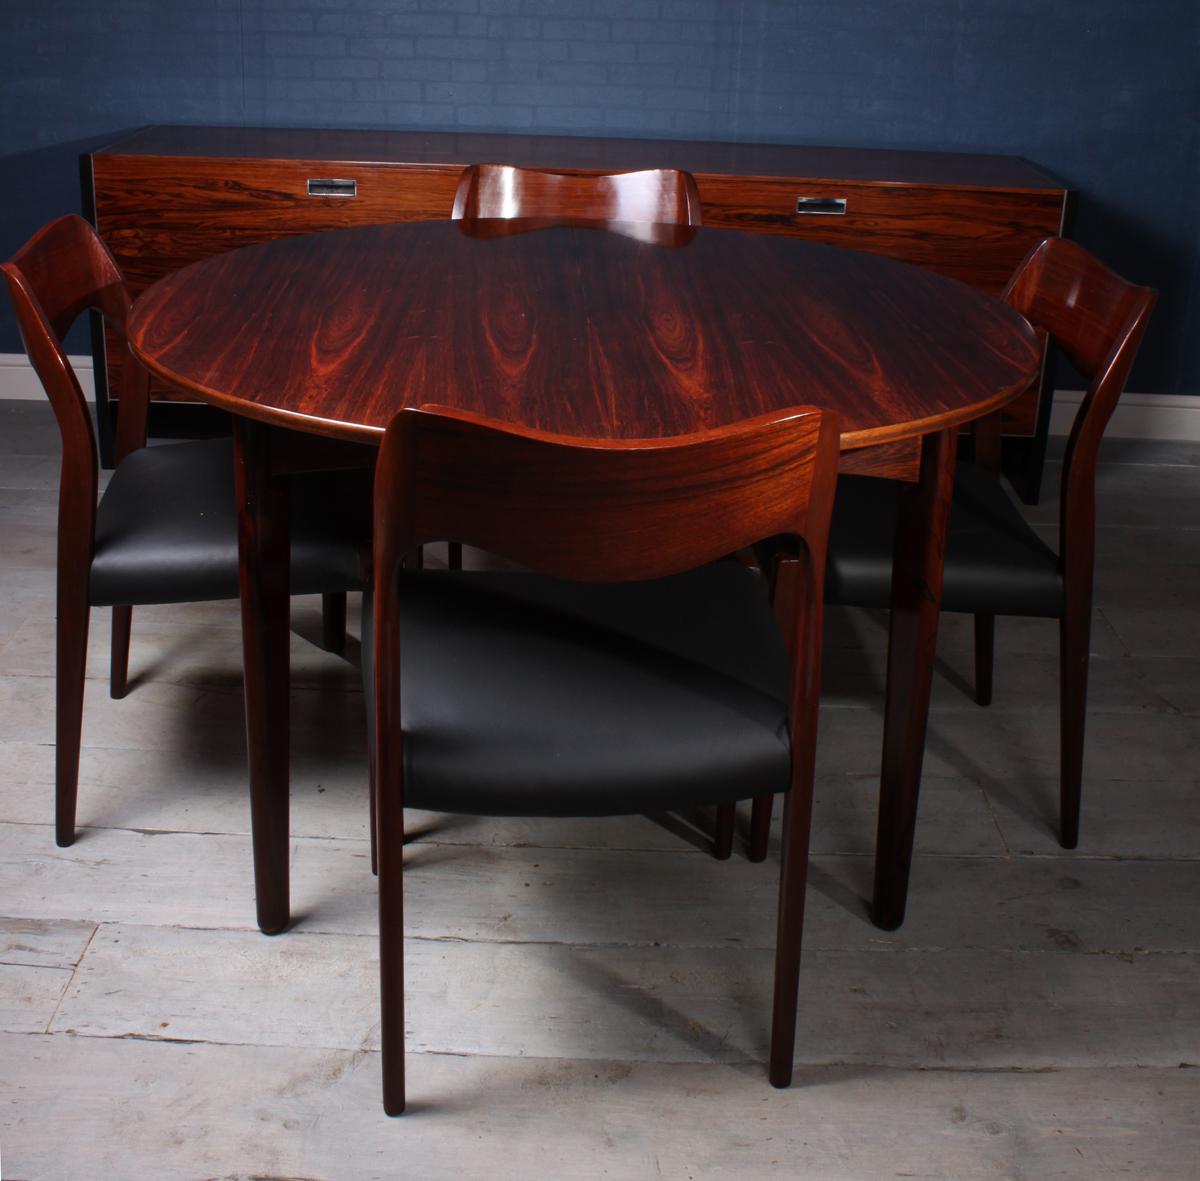 Midcentury Danish rosewood dining table
A Danish produced two leaf dining table this has four removable legs, pull open top on solid beech runners and two leaves, it has been fully polished and is in excellent condition throughout

The table is